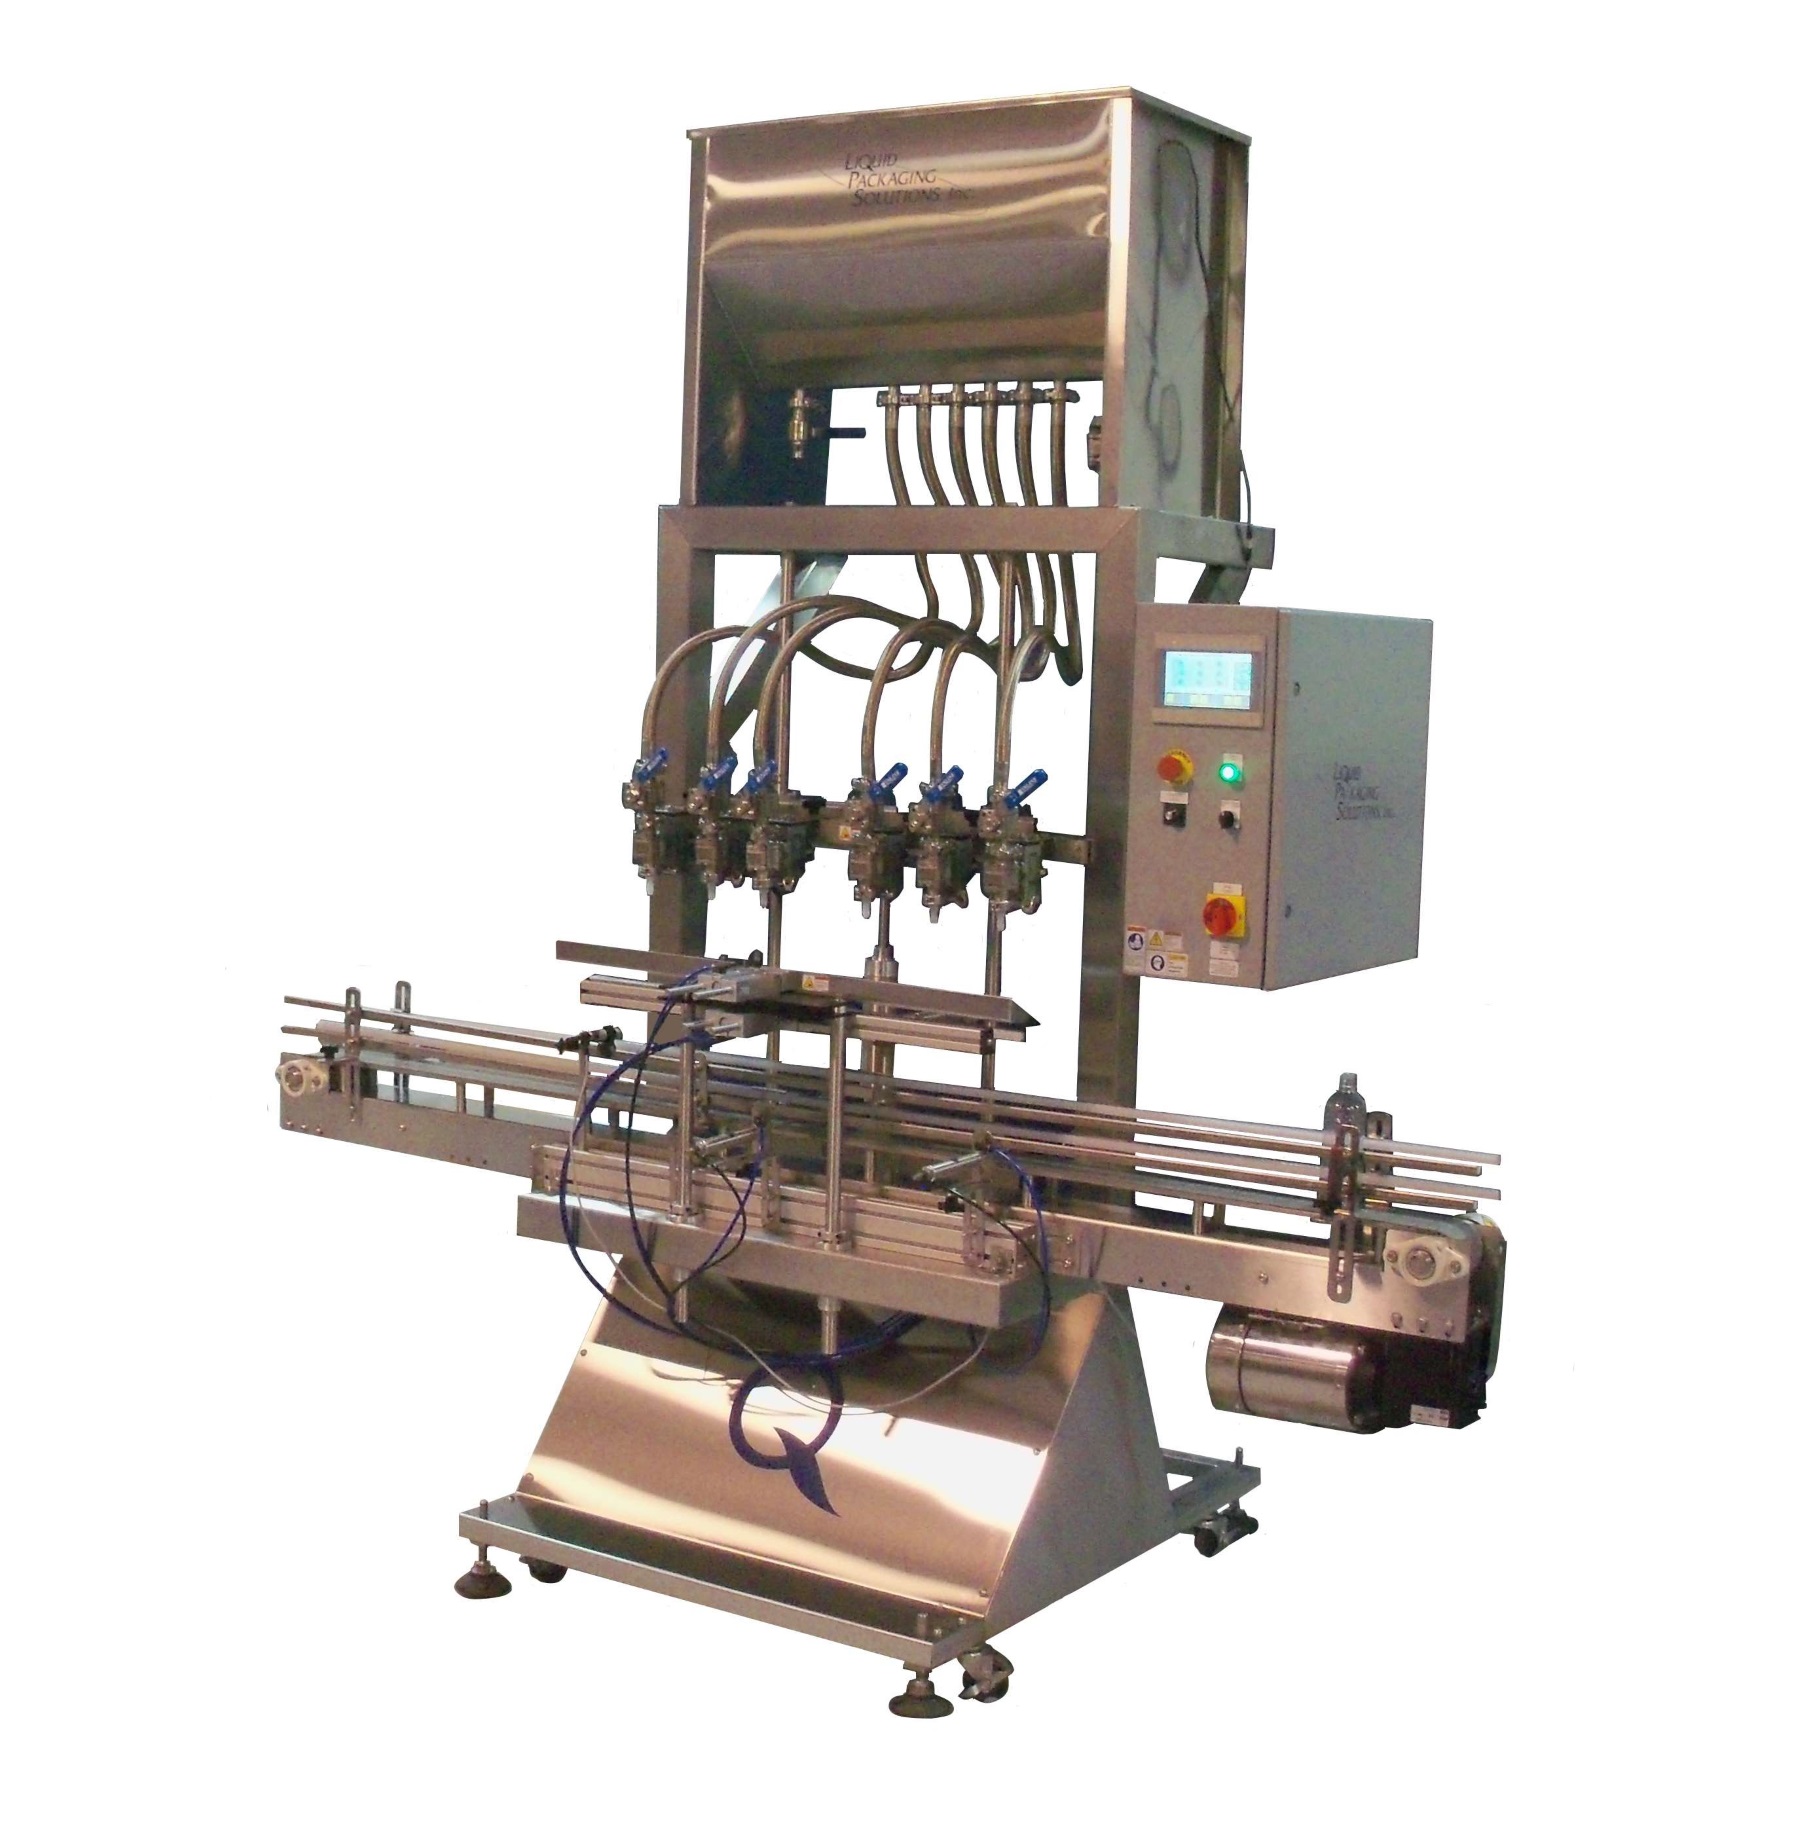 Automatic Gravity Filling Machine from Liquid Packaging Solutions